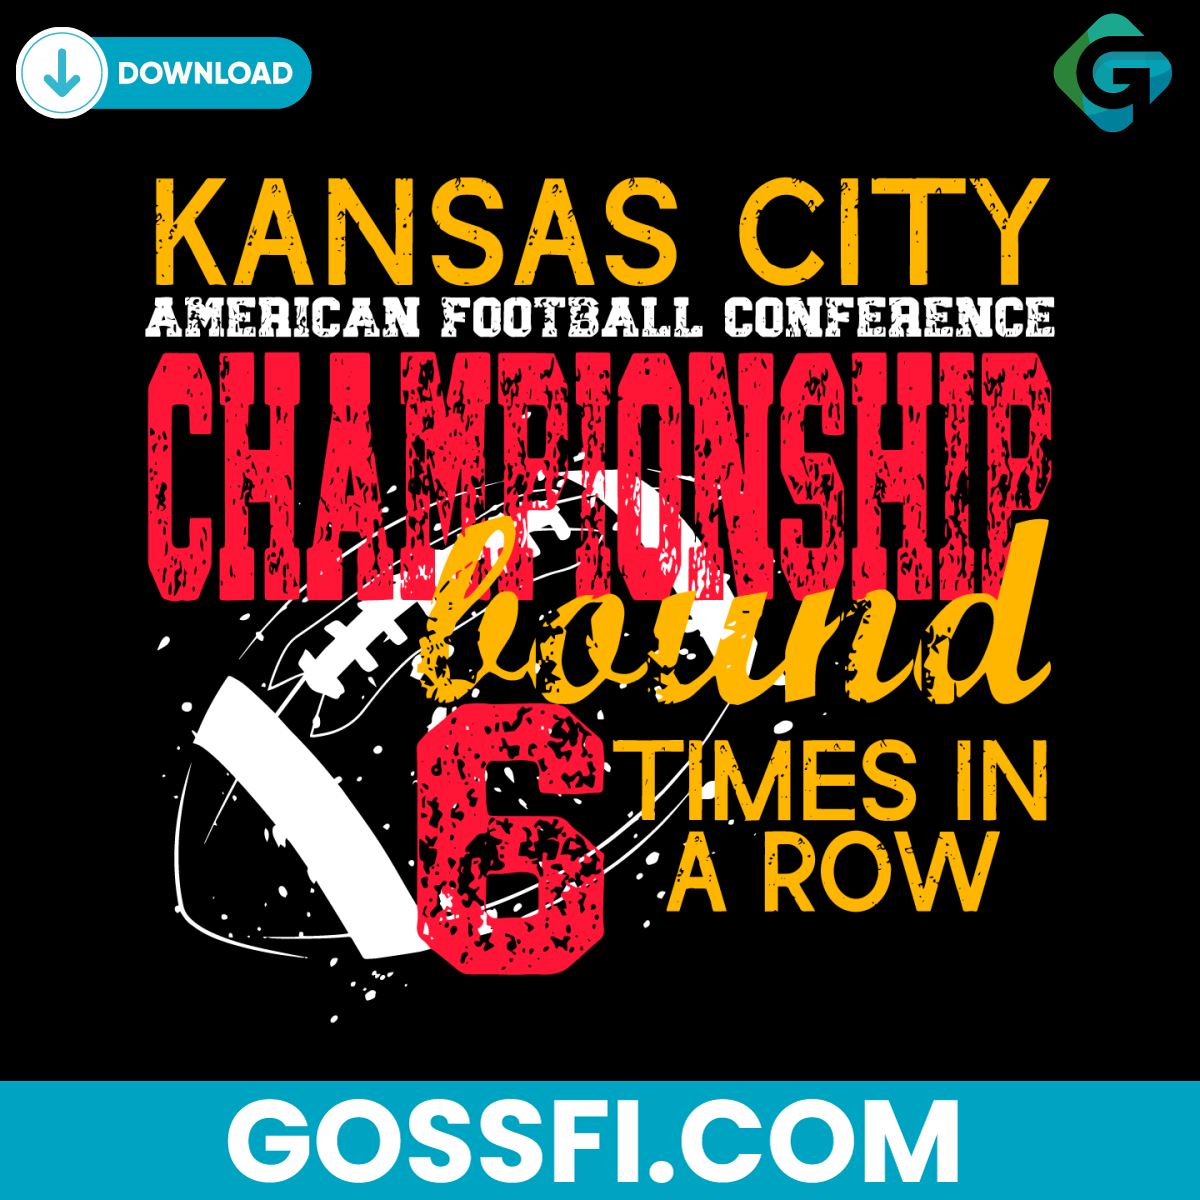 kansas-city-american-football-conference-championship-bound-6-times-in-a-row-svg